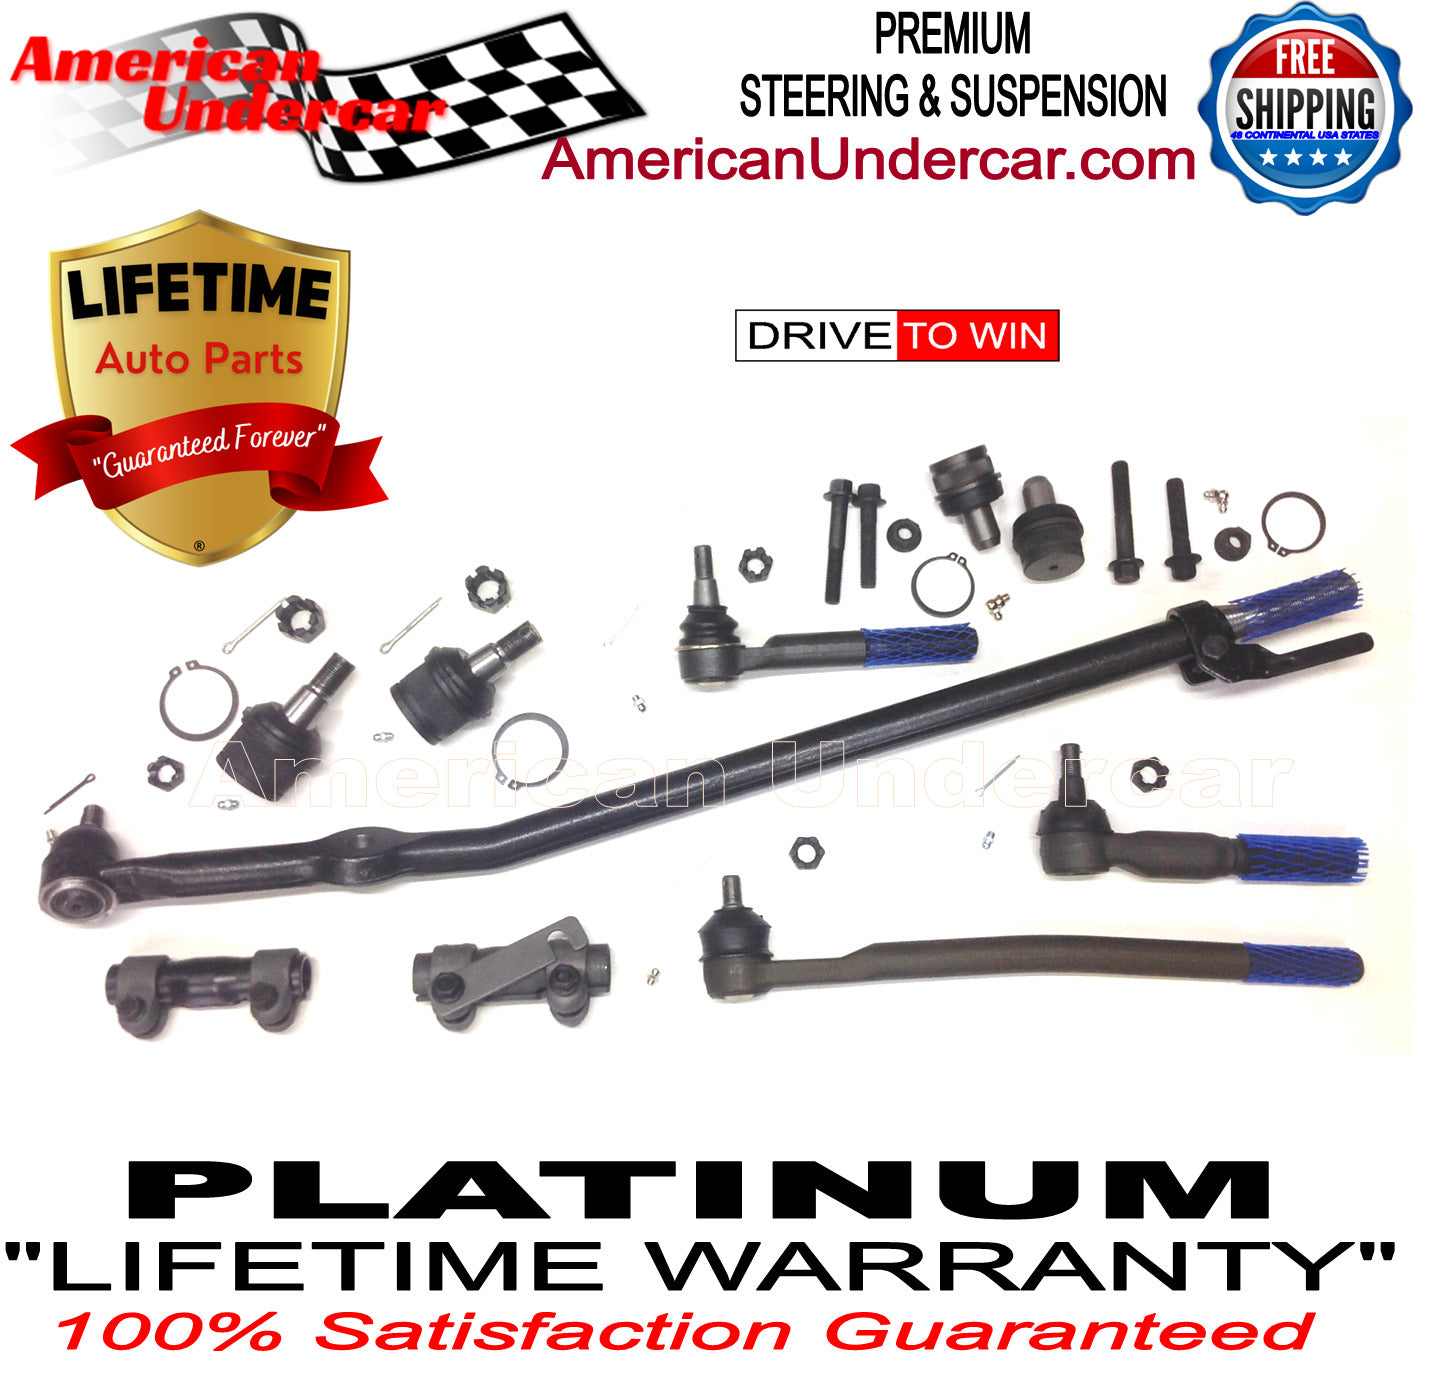 Lifetime Super Duty Ball Joint Drag Link Tie Rod Kit for 1999-2004 Ford F350 Super Duty 2WD